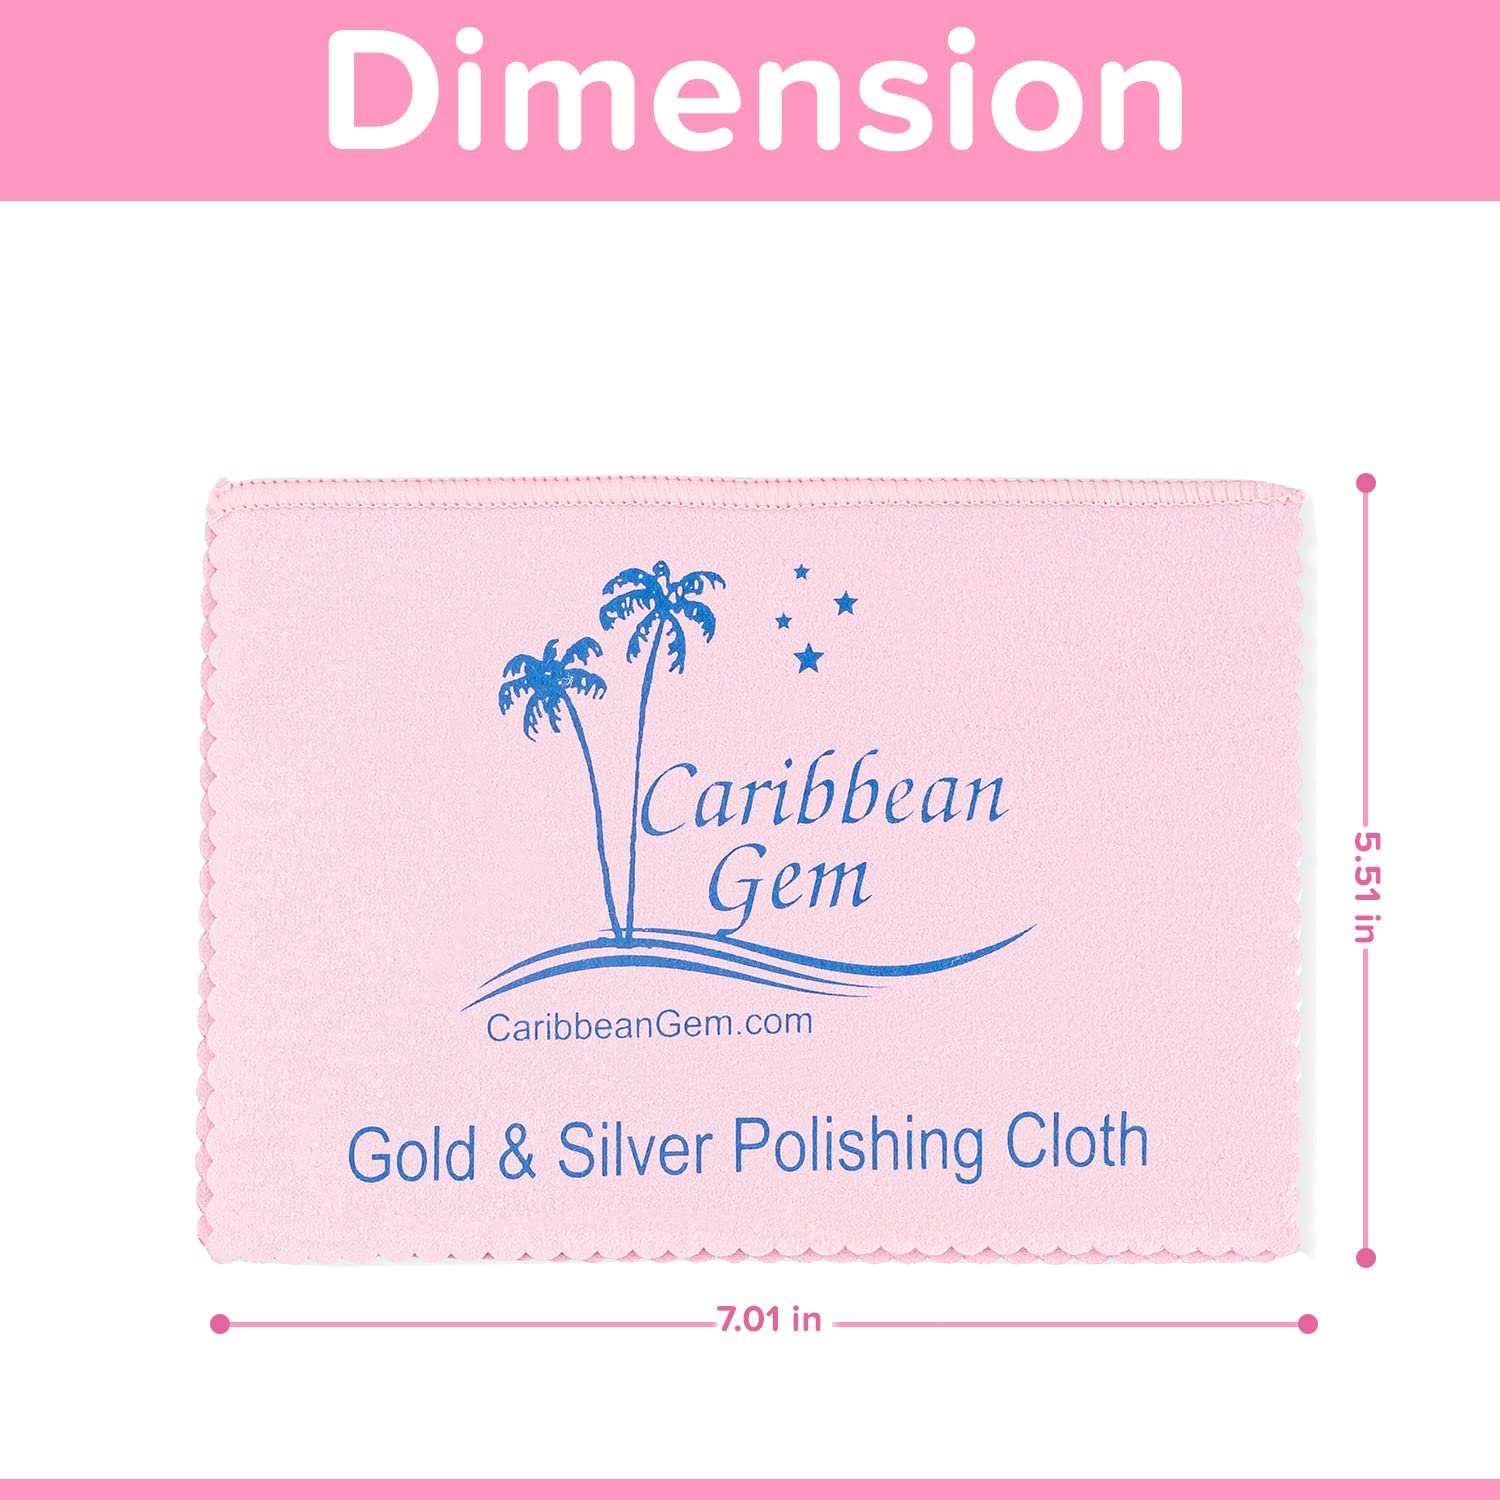 Gem Glow Gold & Silver Polishing Cloth, 4-ply, 100% Cotton, Removes Tarnish  on Gold & Silver Jewelry & Watches